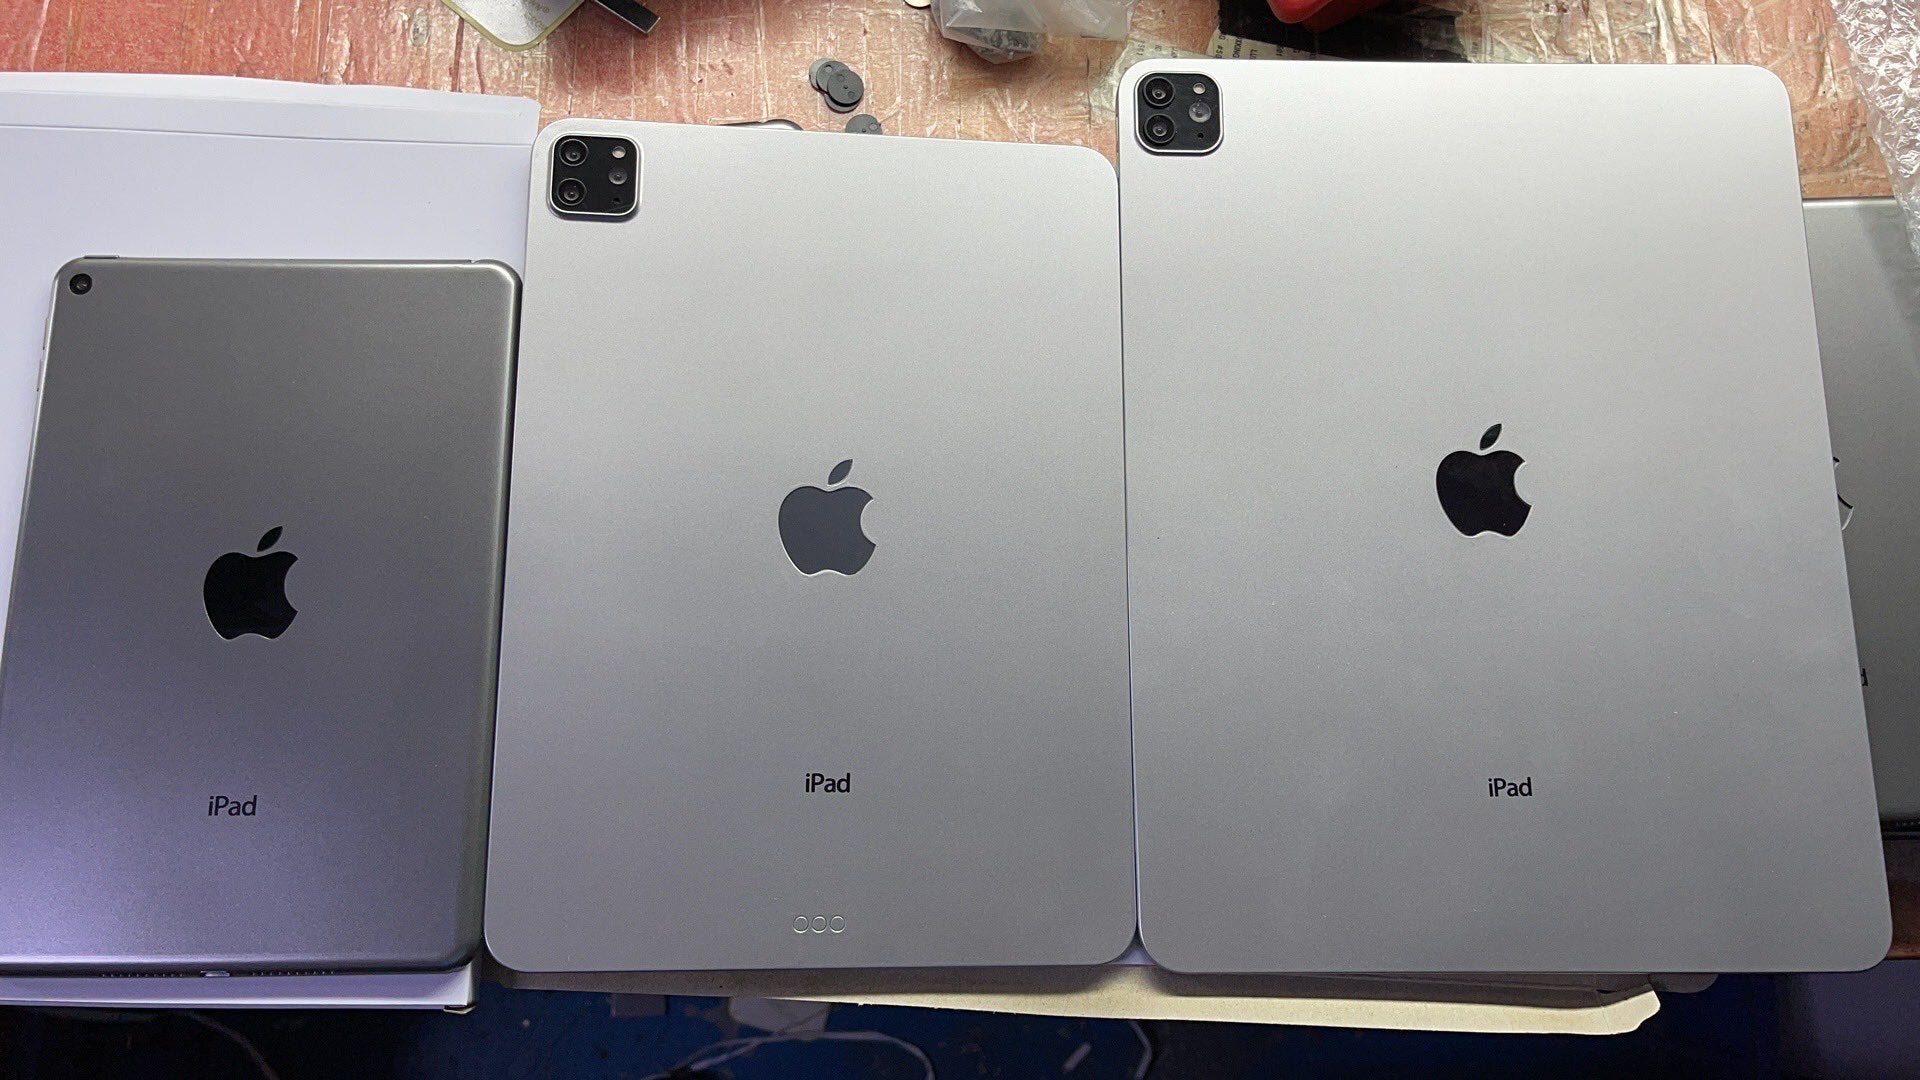 If those images can be trusted, the iPad Pro 12.9-inch will have no Smart Connector on the back - Alleged iPad Pro and iPad mini 2021 model dummies show little changes